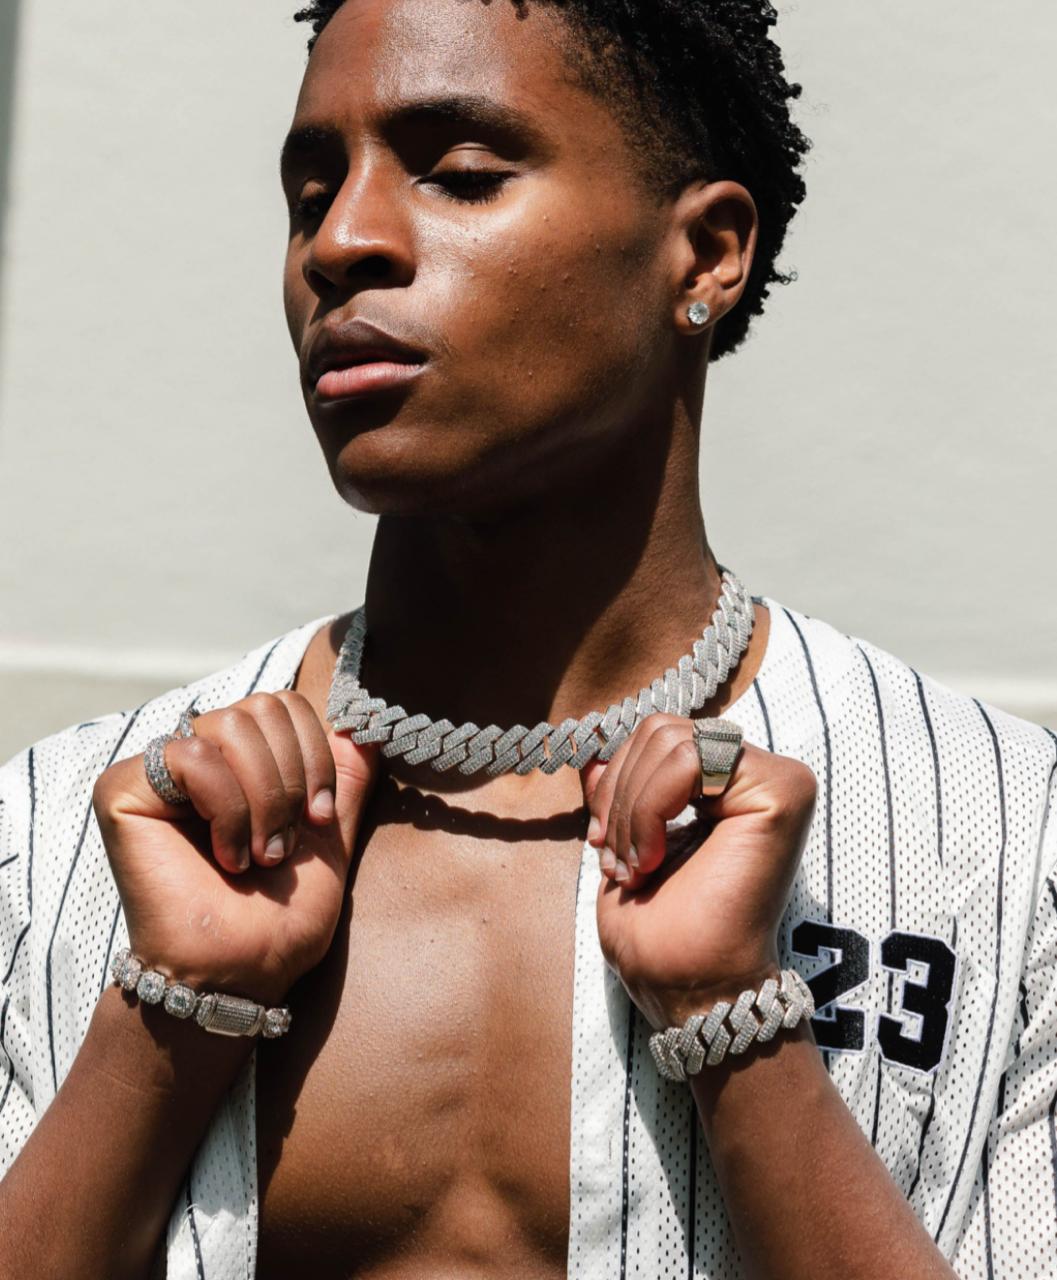 Rap artists have transformed the fine-jewellery market, making the way for many to enter this business, says Jordan Duran.